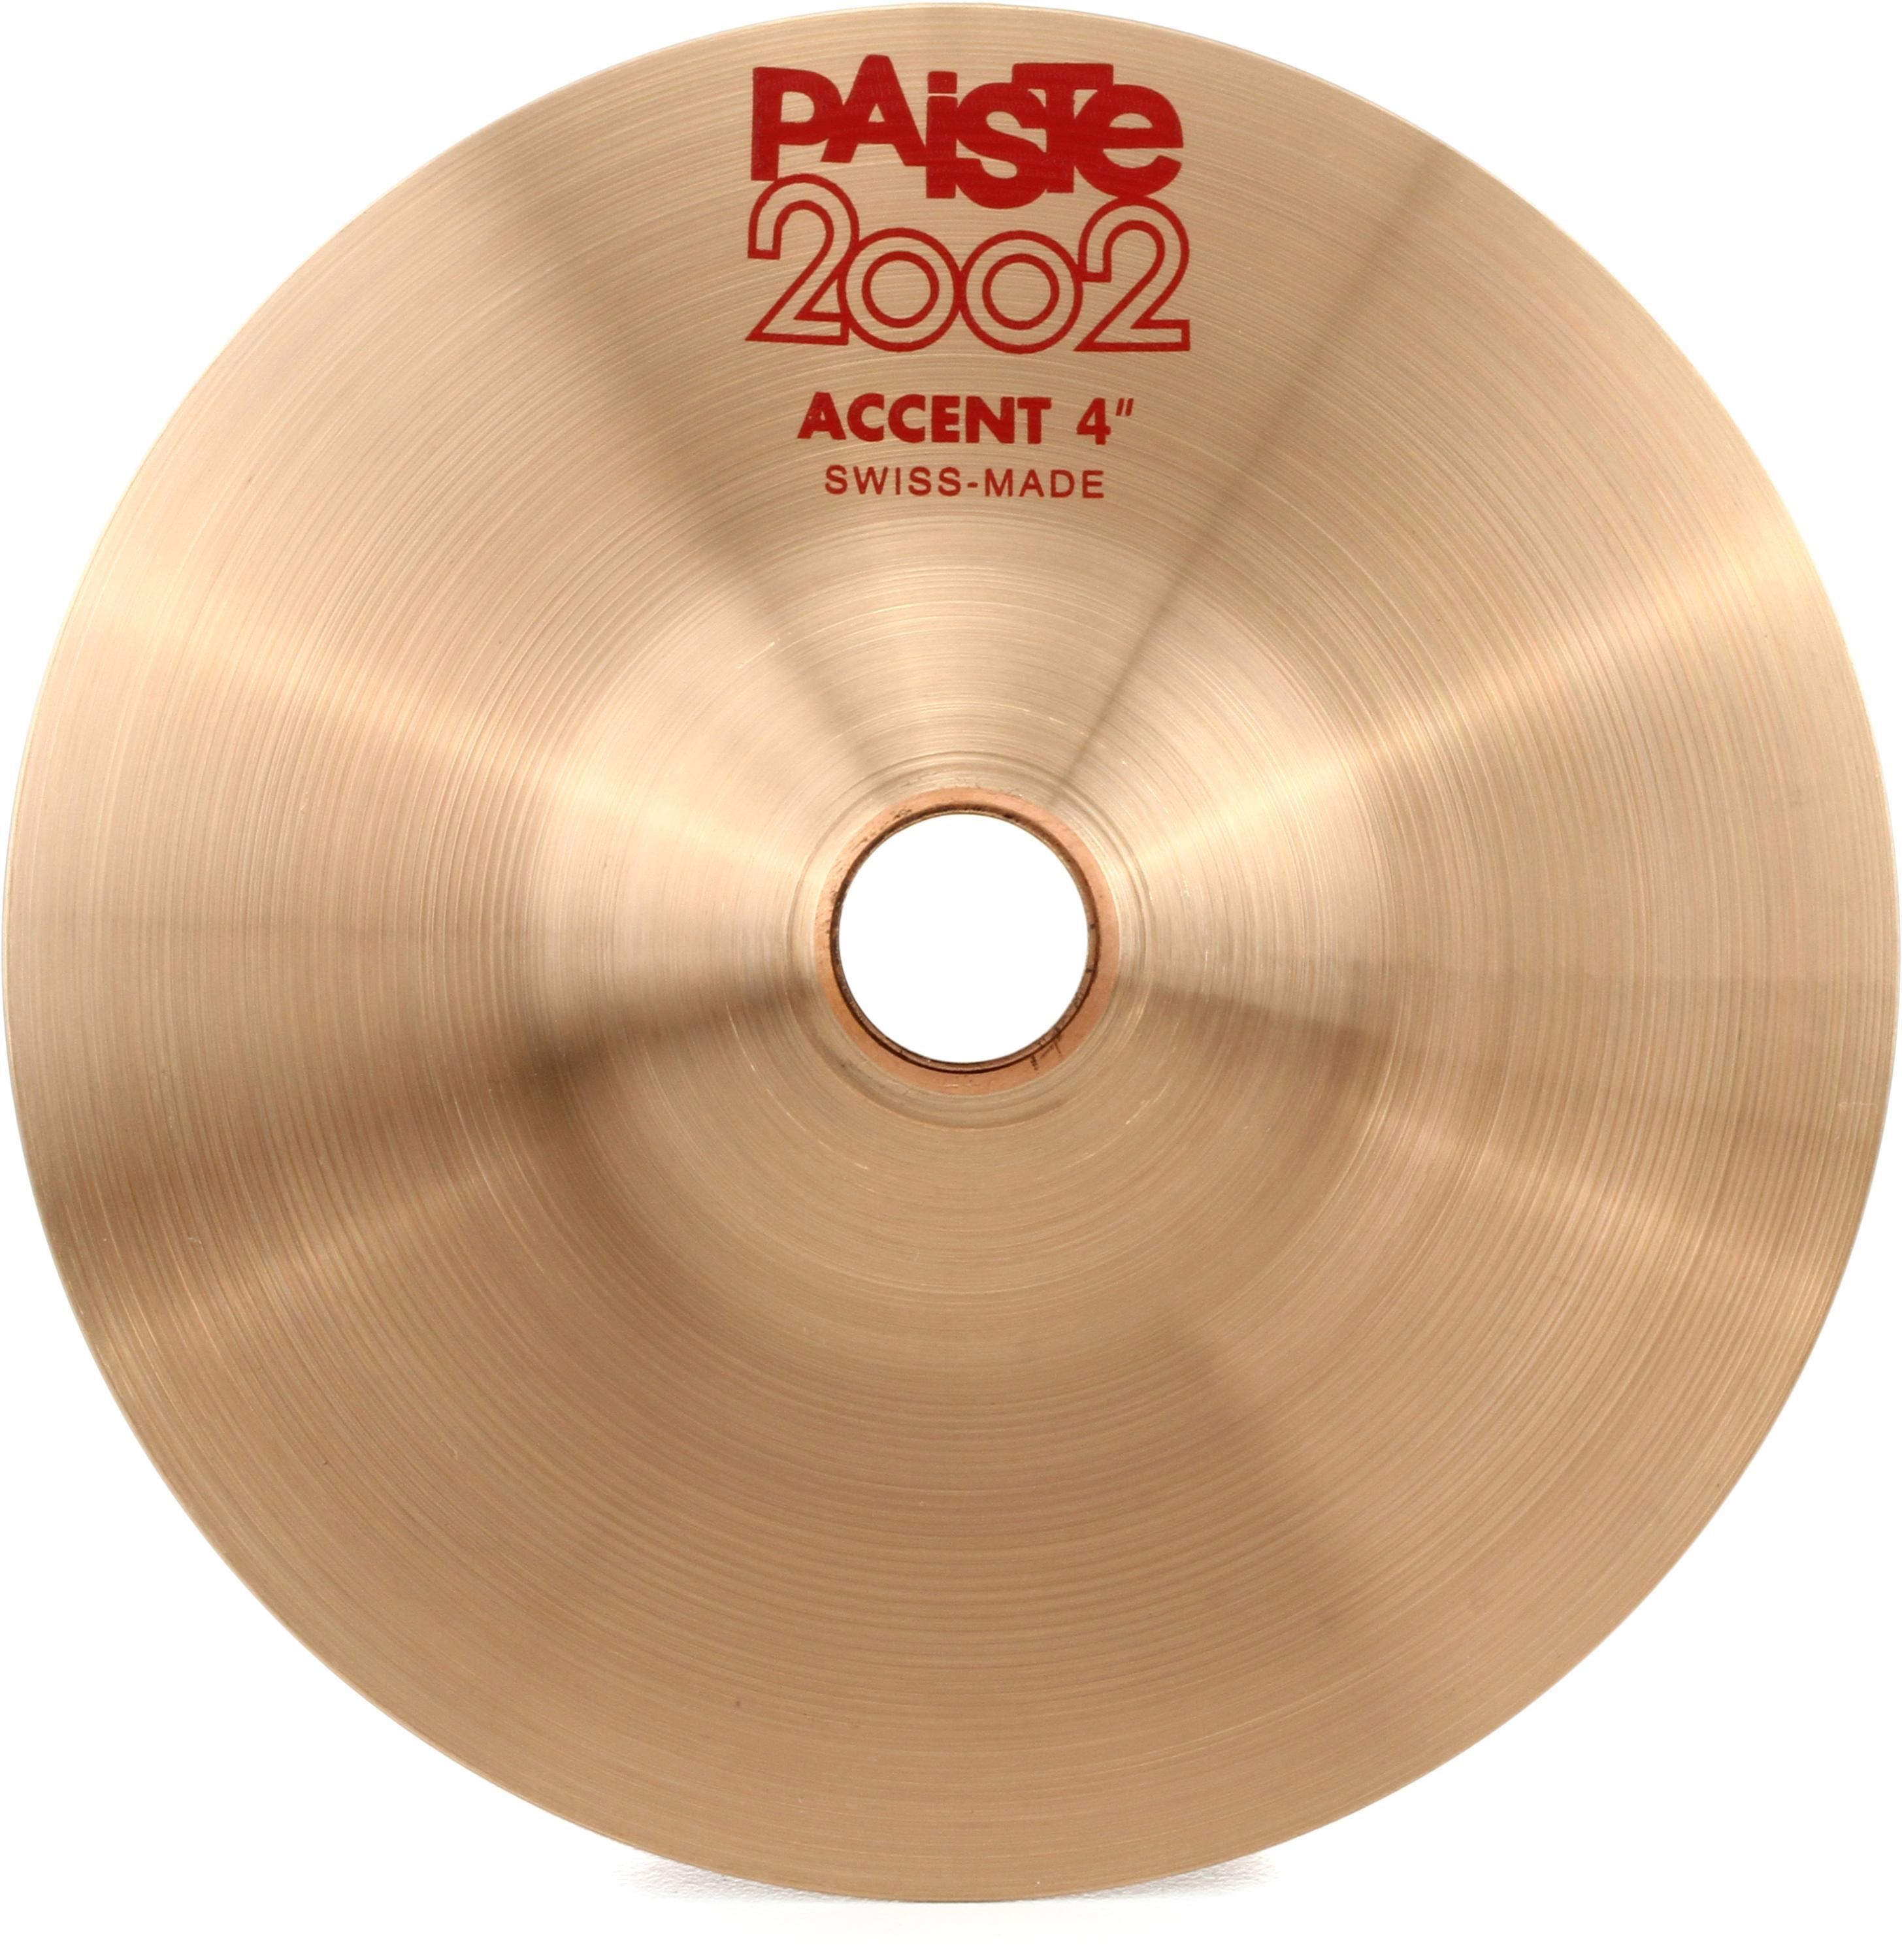 Paiste 4 inch 2002 Accent Cymbal - each